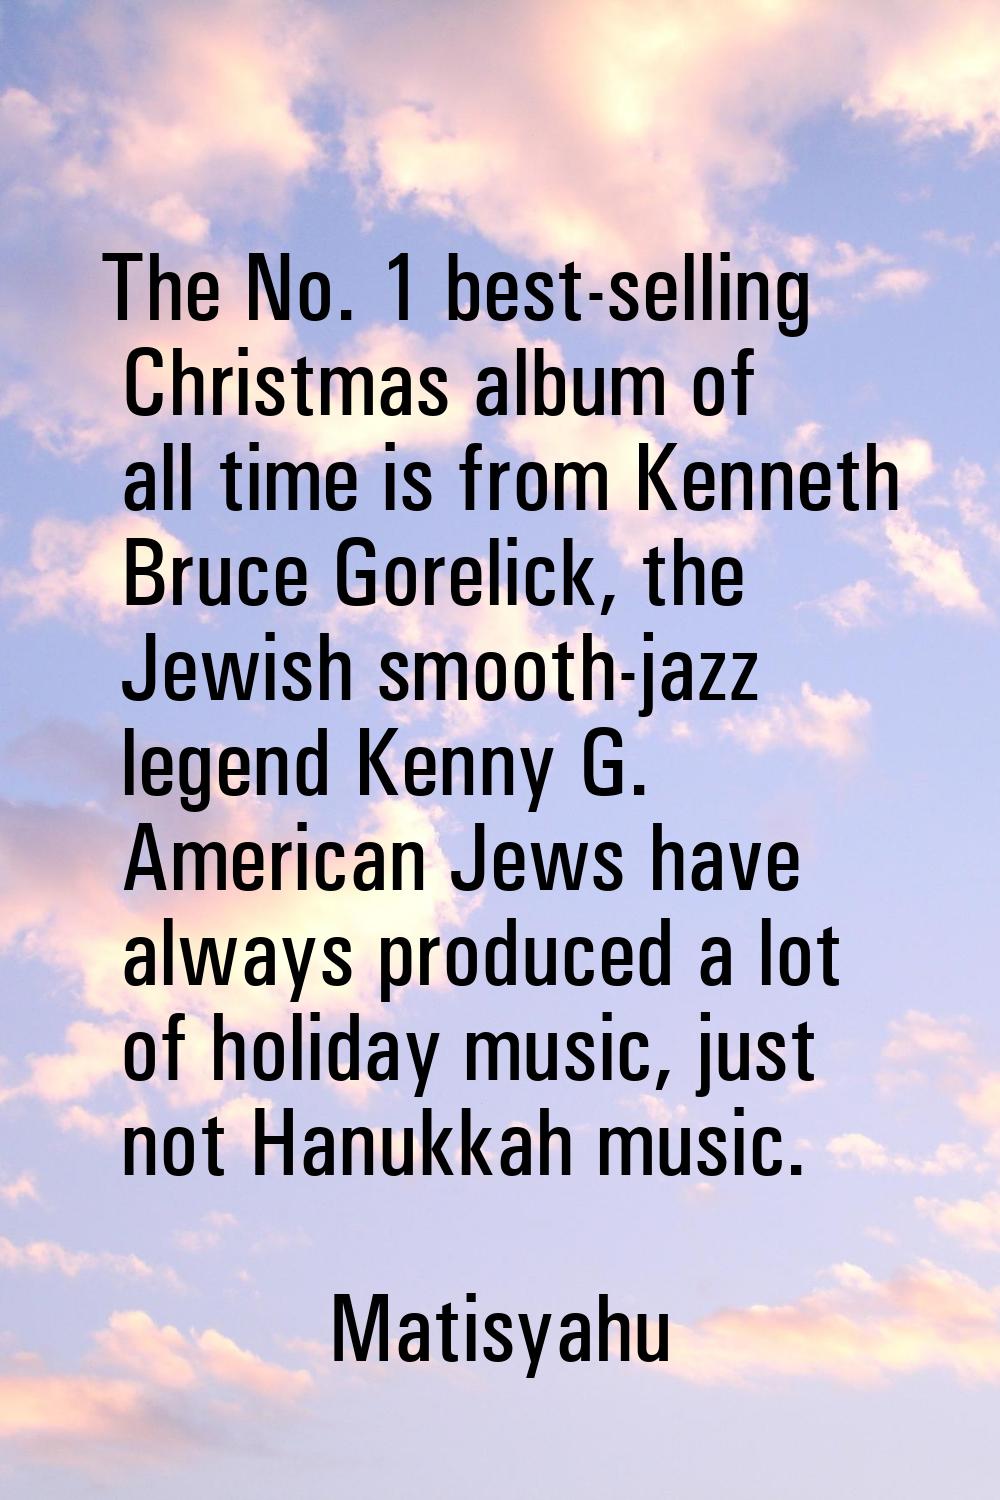 The No. 1 best-selling Christmas album of all time is from Kenneth Bruce Gorelick, the Jewish smoot